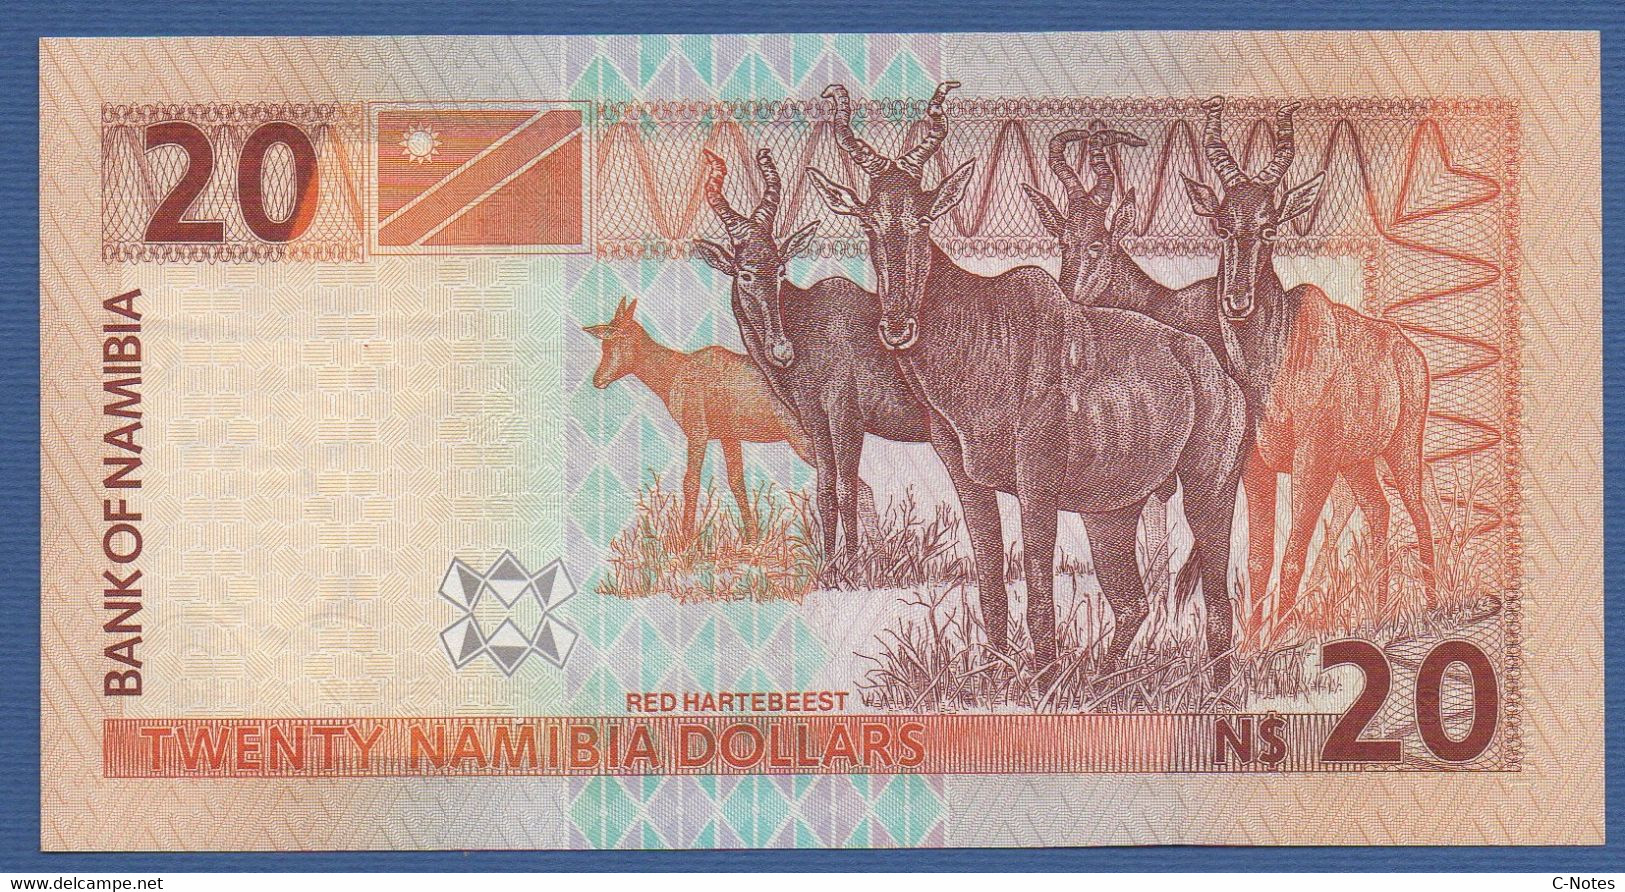 NAMIBIA - P. 6a – 20 Namibia Dollars ND (2003) UNC Serie J29744057 8 Digits Serial - Namibie